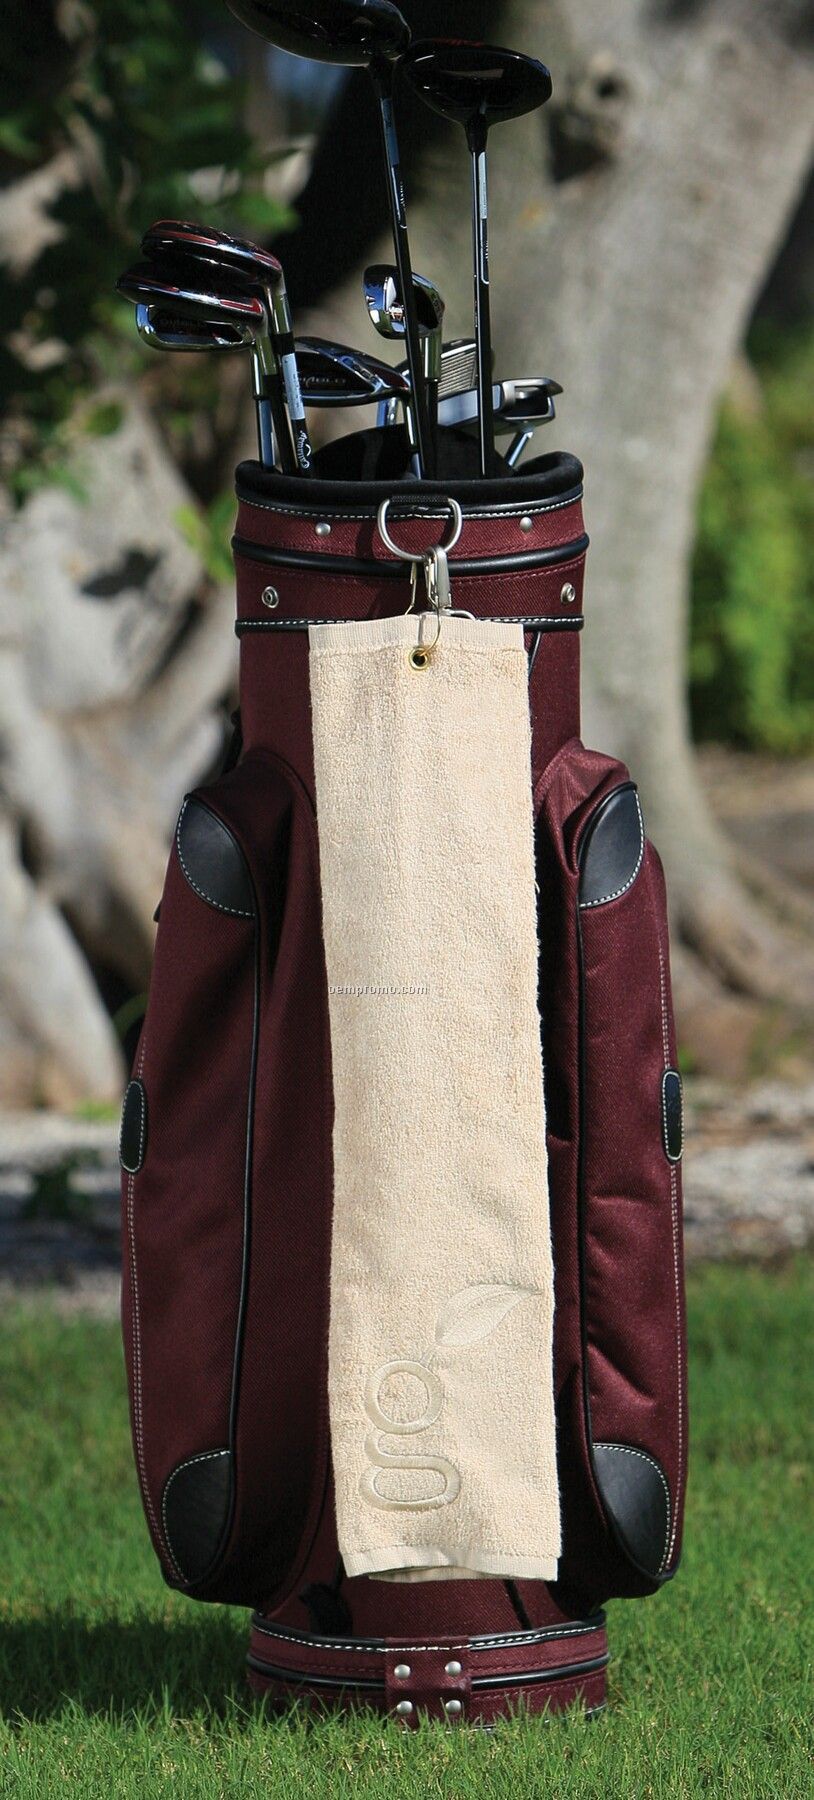 Bamboo / Cotton Blend Golf Towel - Embroidered